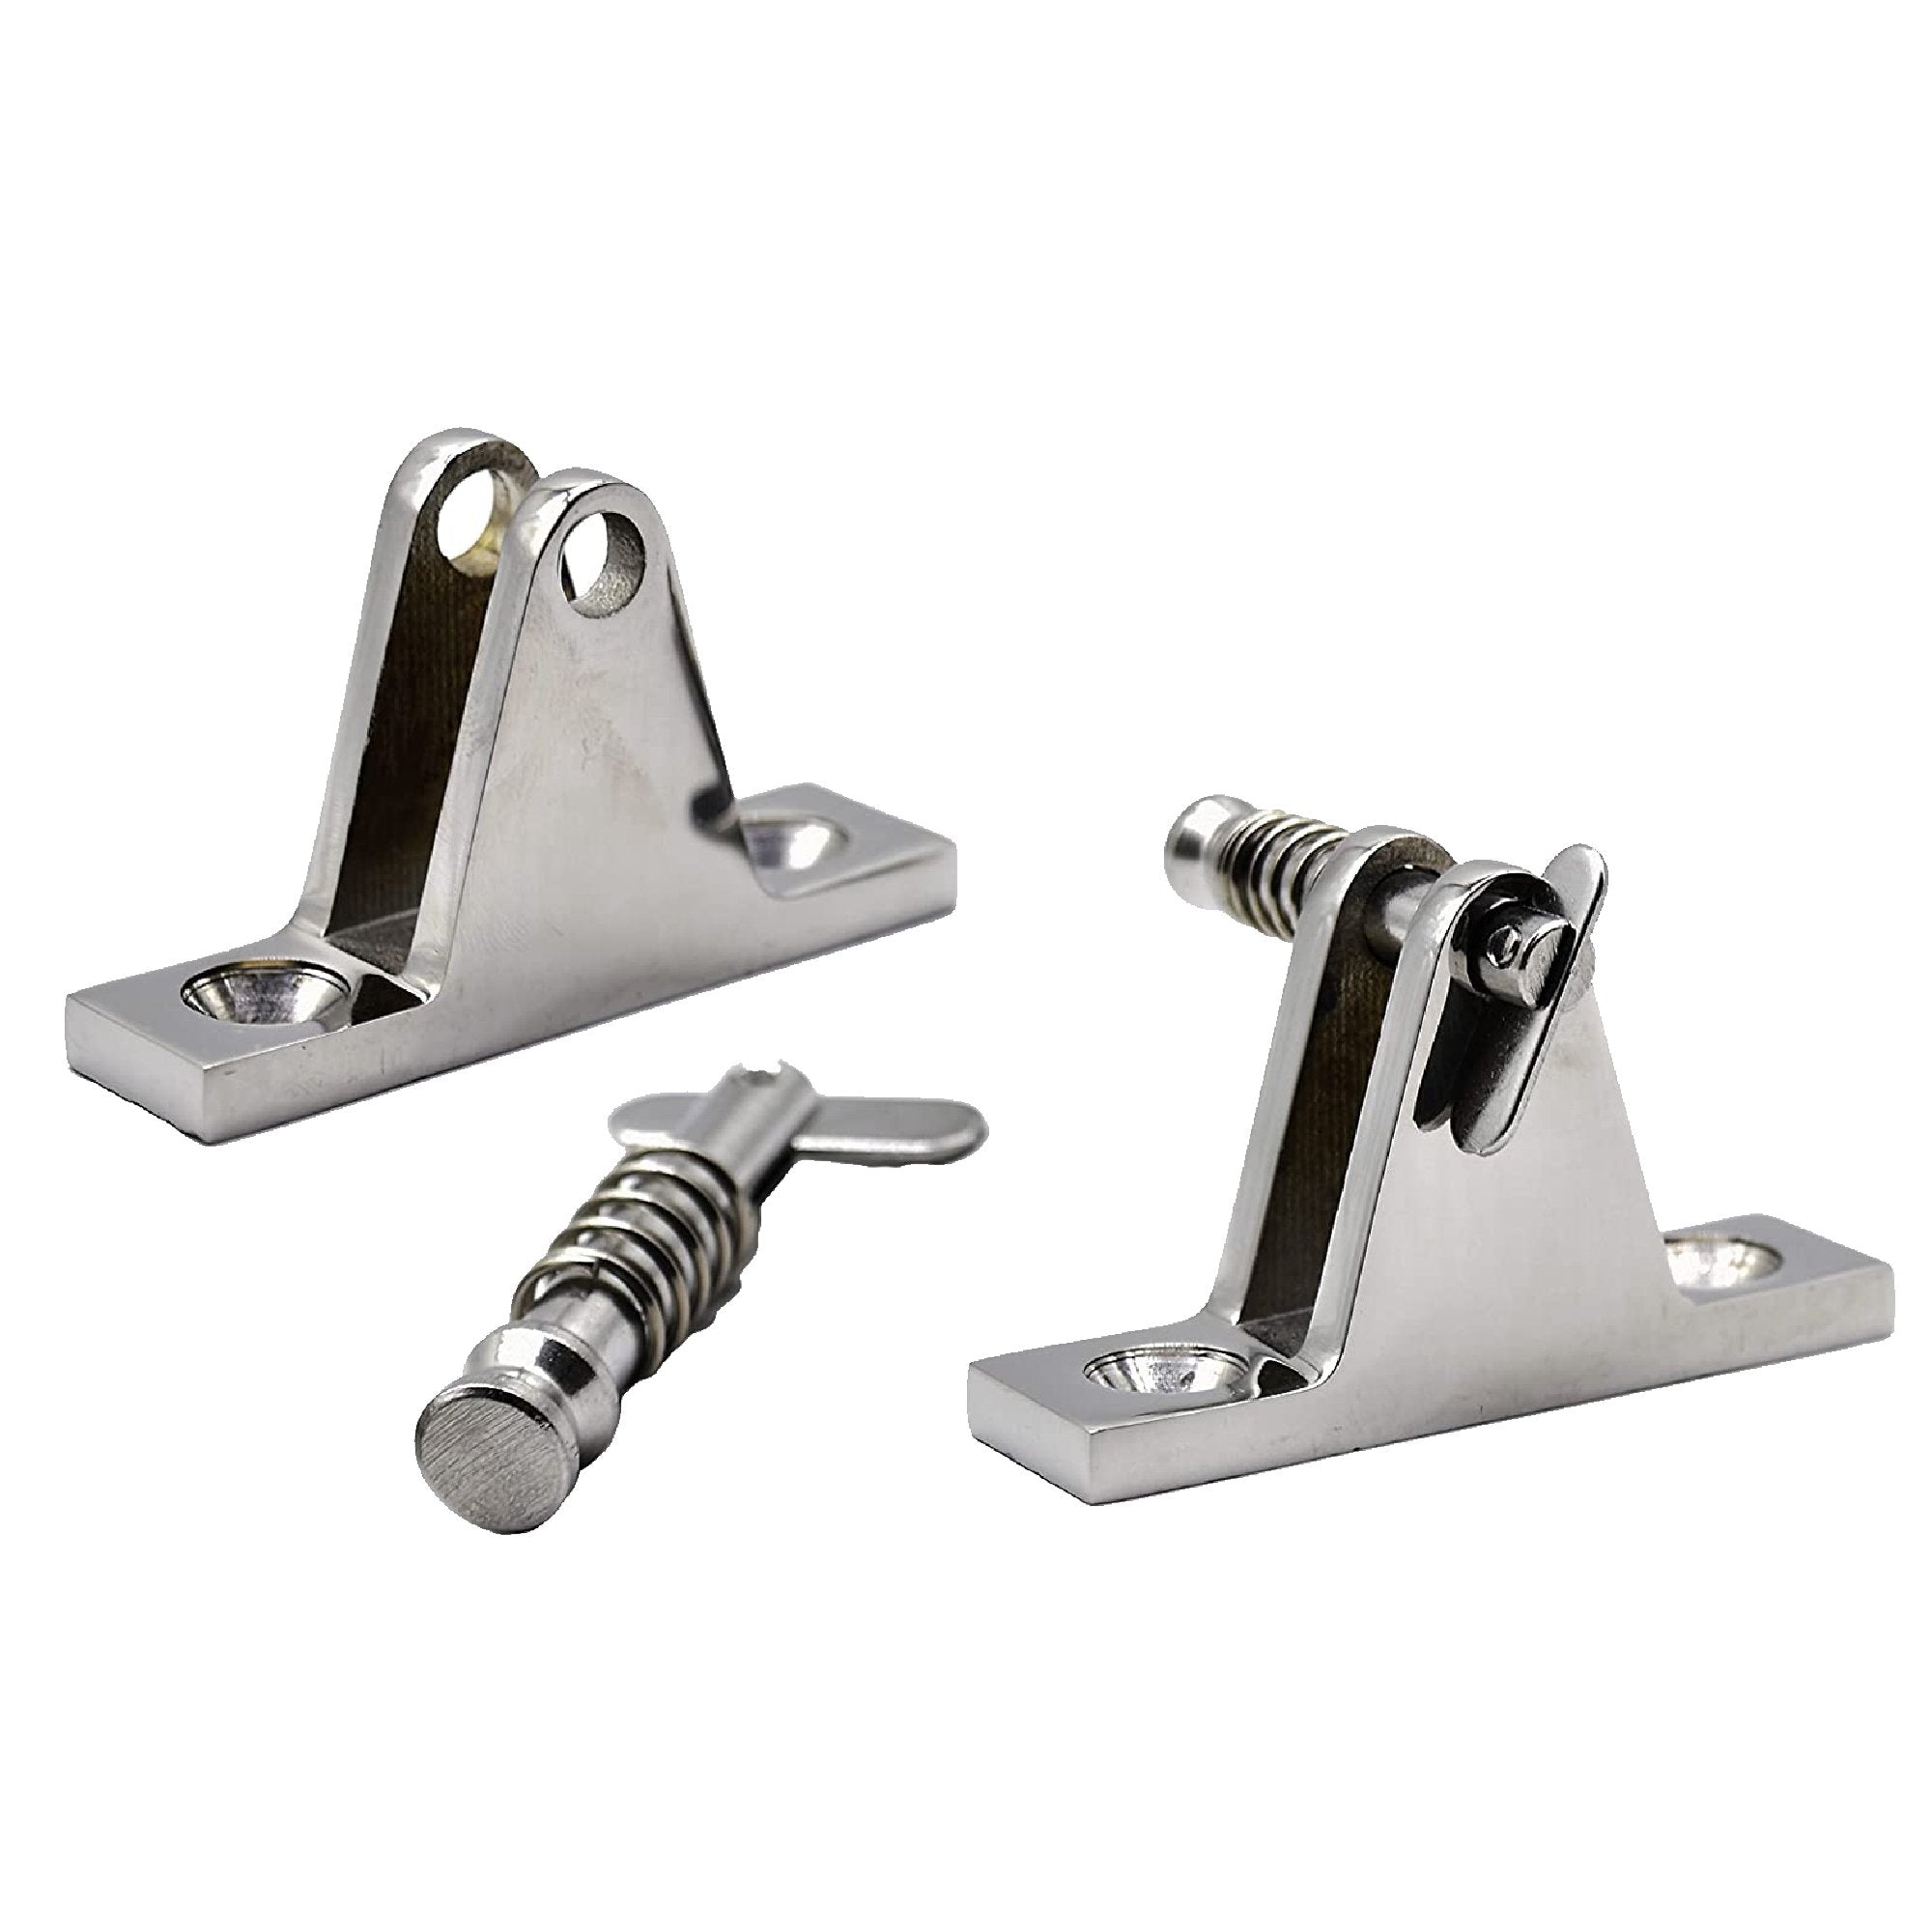 Marine City 316 Stainless Steel Bimini Top Deck Hinges 90 degree with Quick Release Pin Boat Top Fittings Flat Base Hardware(2pcs)